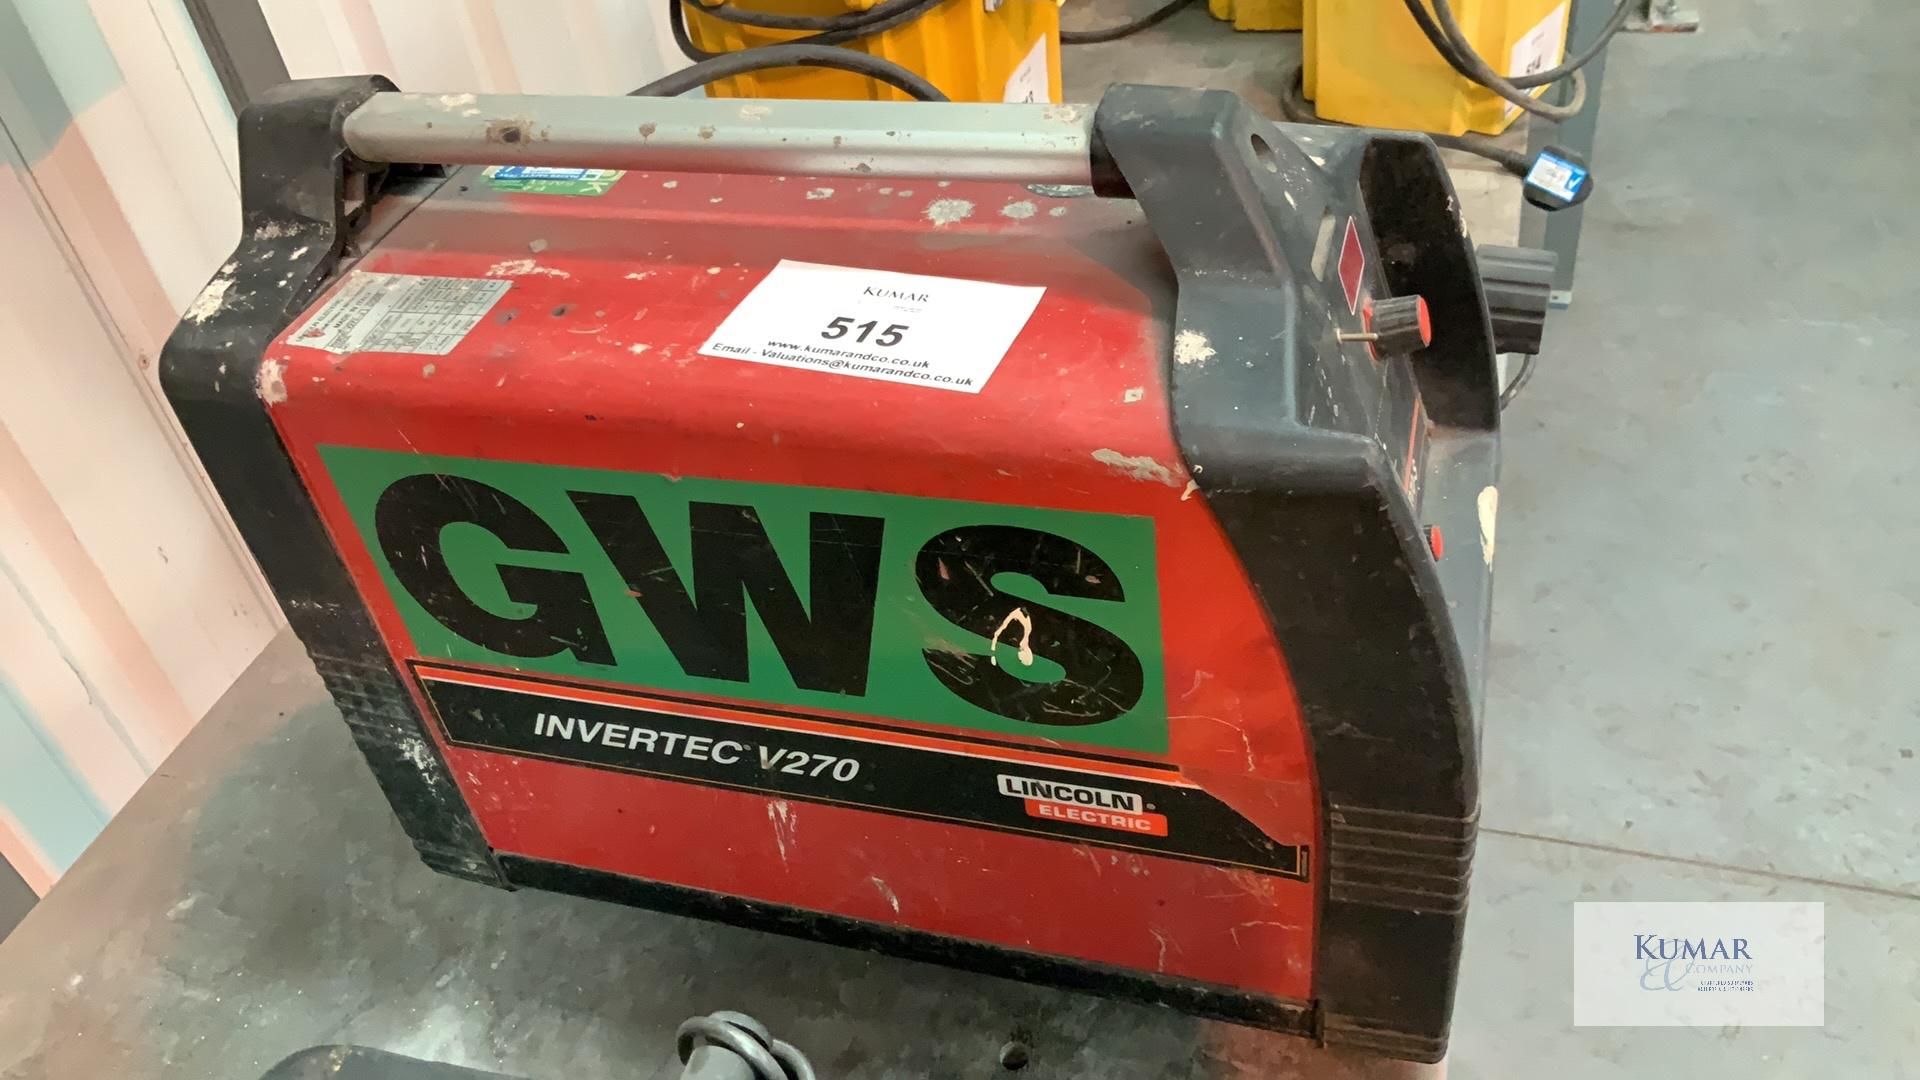 GWS Invertec 270 Inverter Power Source (Spares or Repair) - Please Note This Lot is Located in - Image 2 of 6